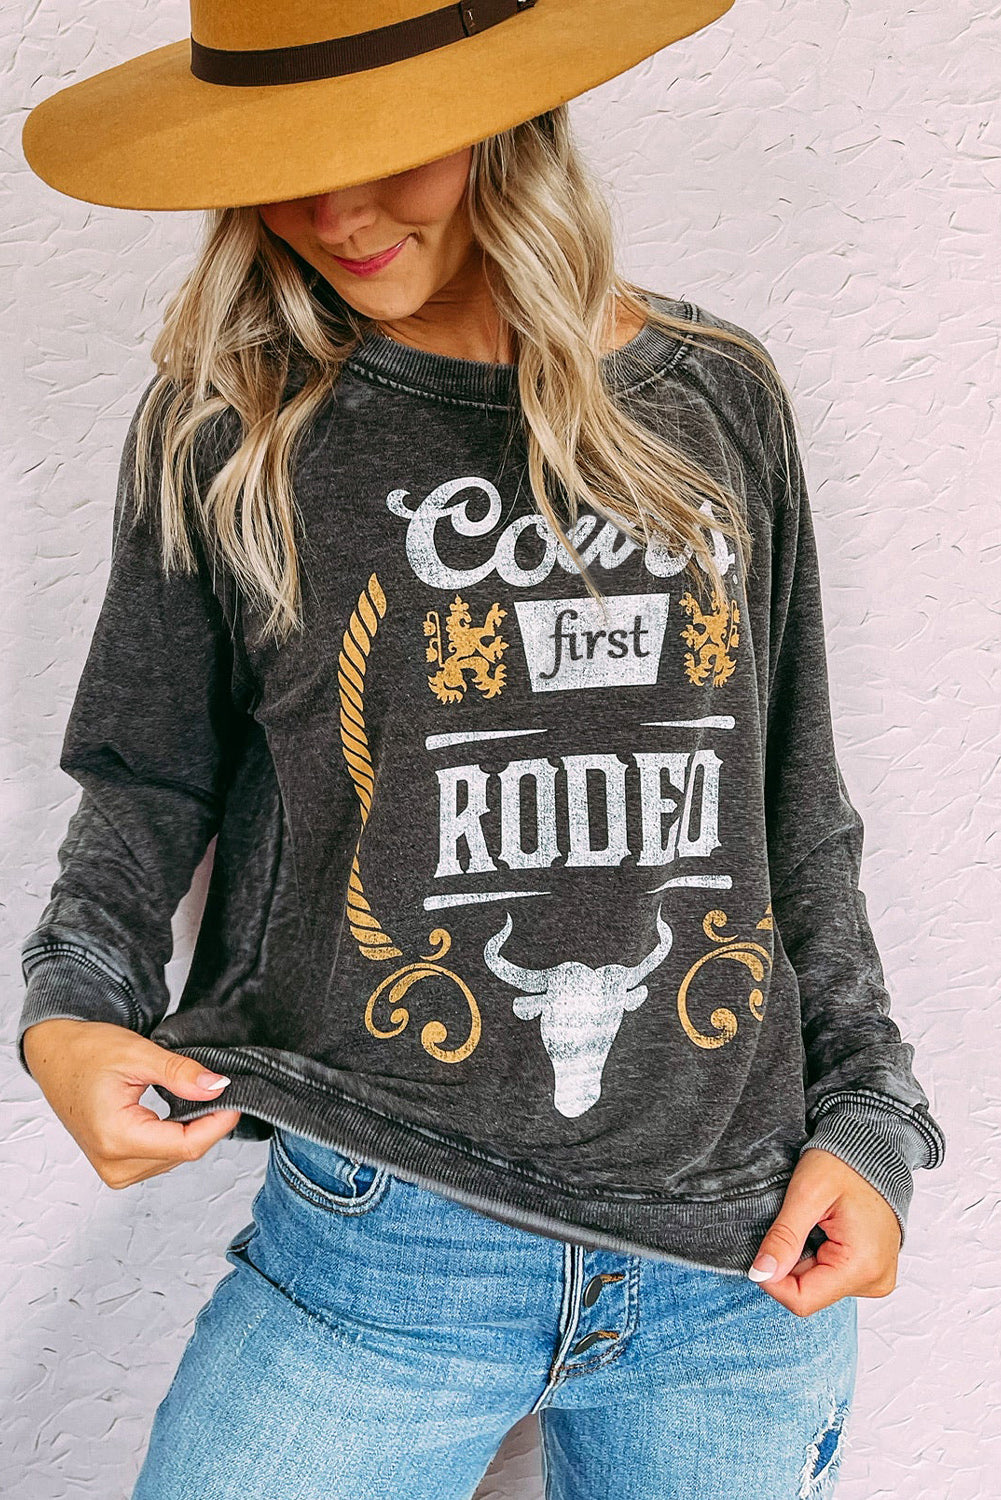 Siva jopica Coors Banquet RODEO Graphic Mineral Washed